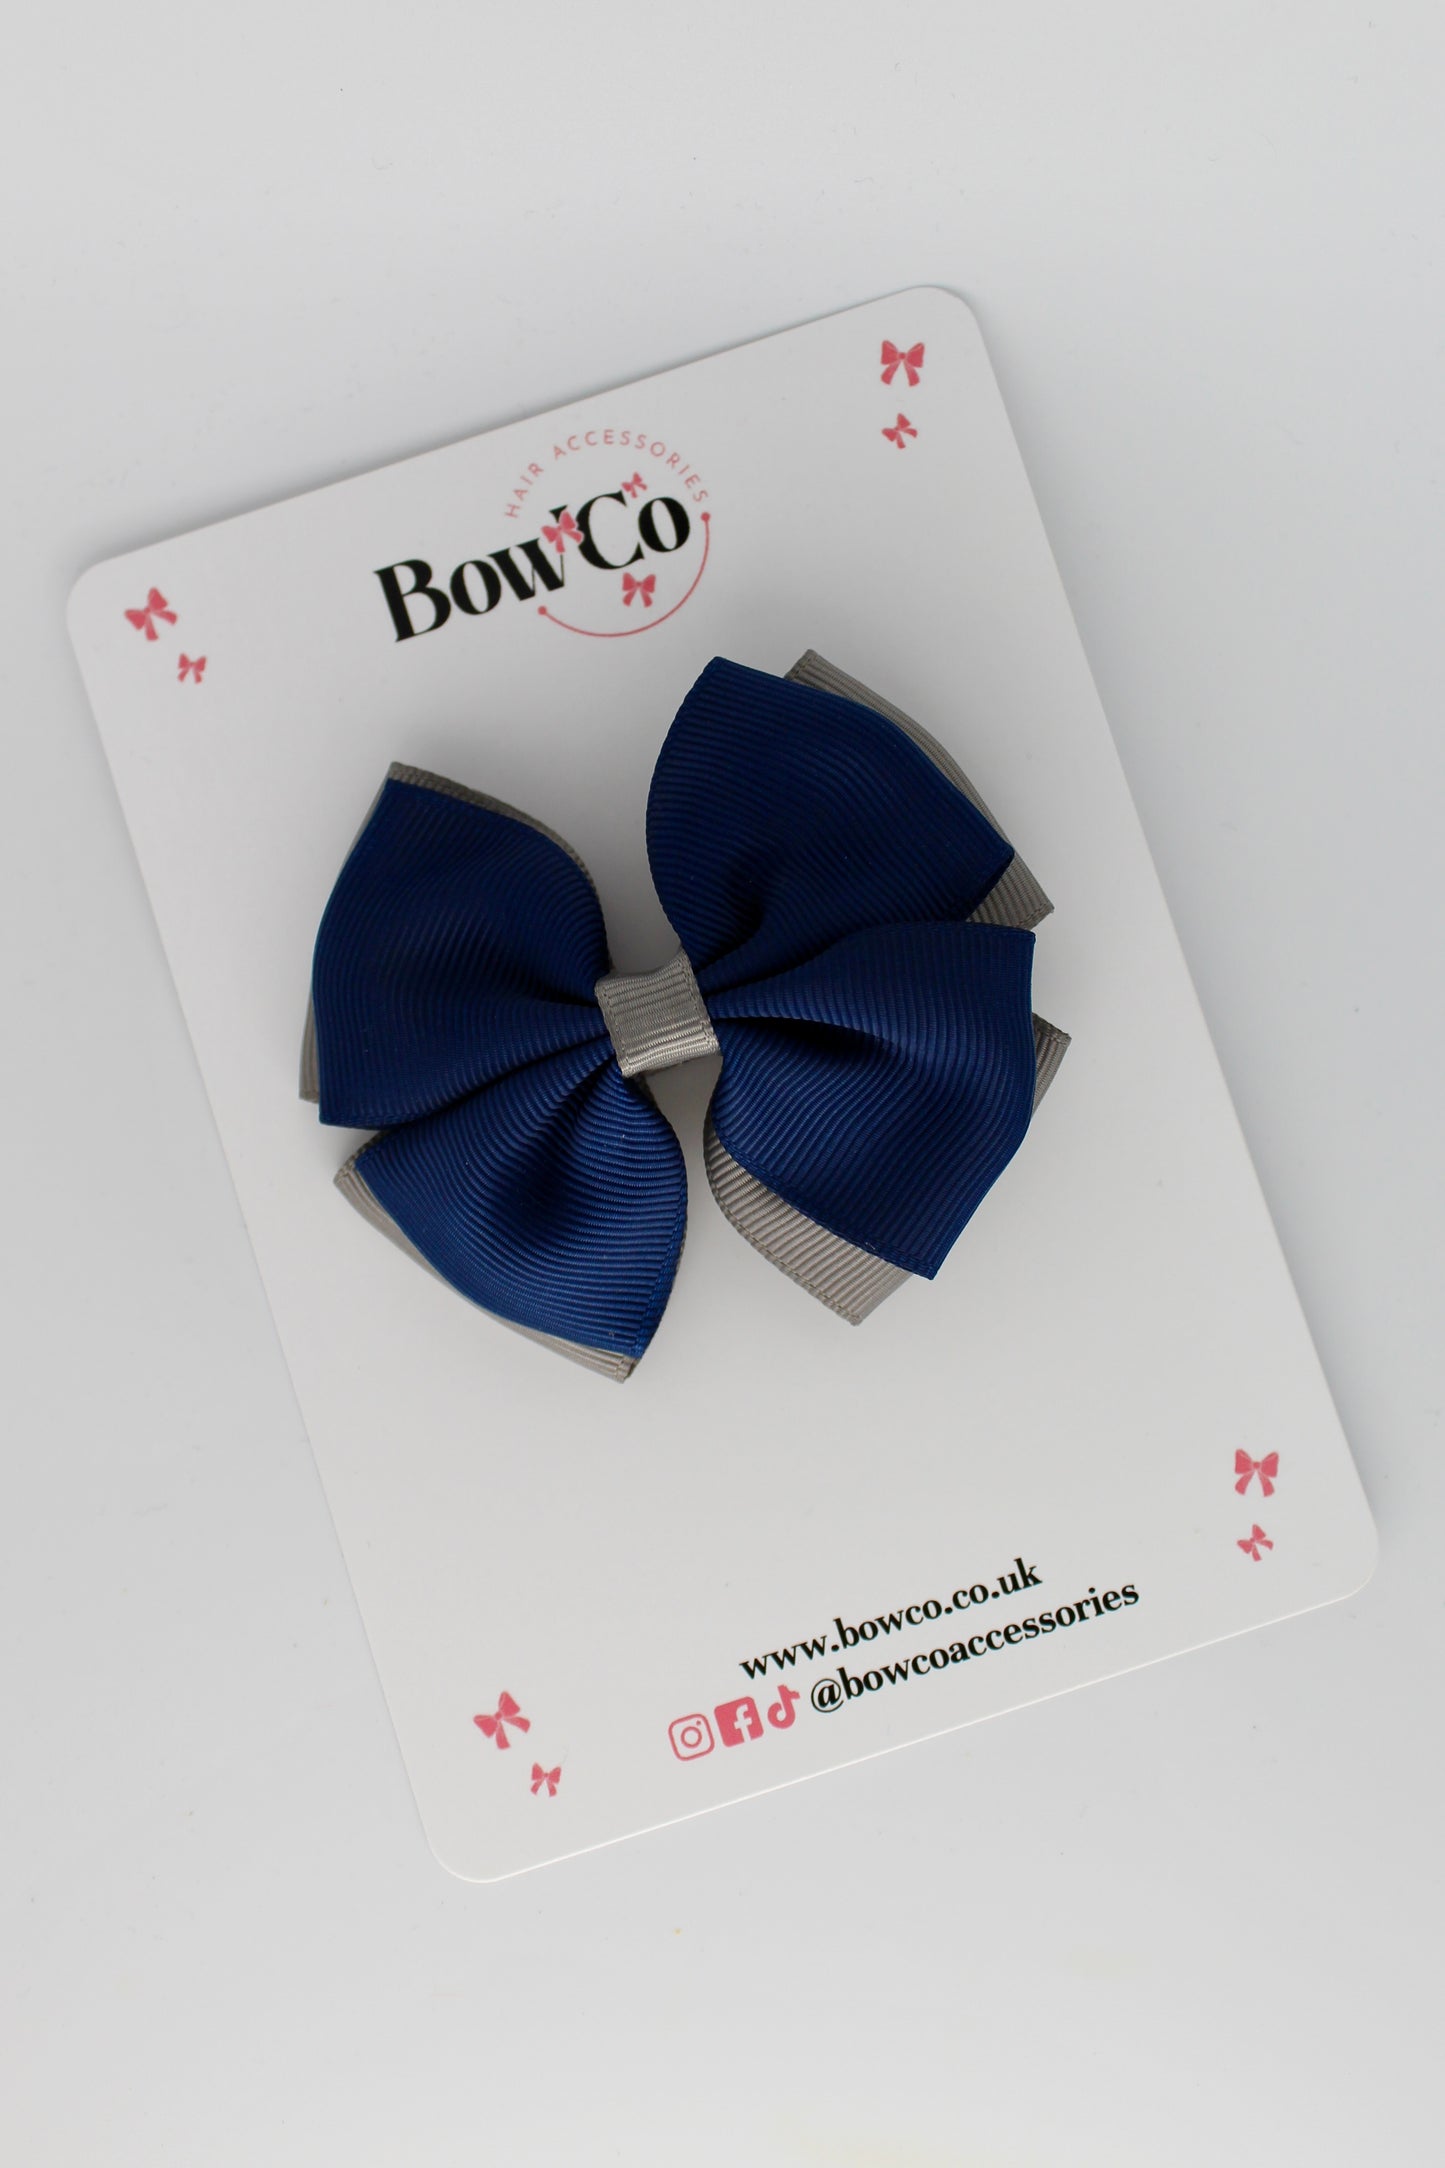 3 Inch Double Layer Bow - Clip - Navy Blue and Metal Grey